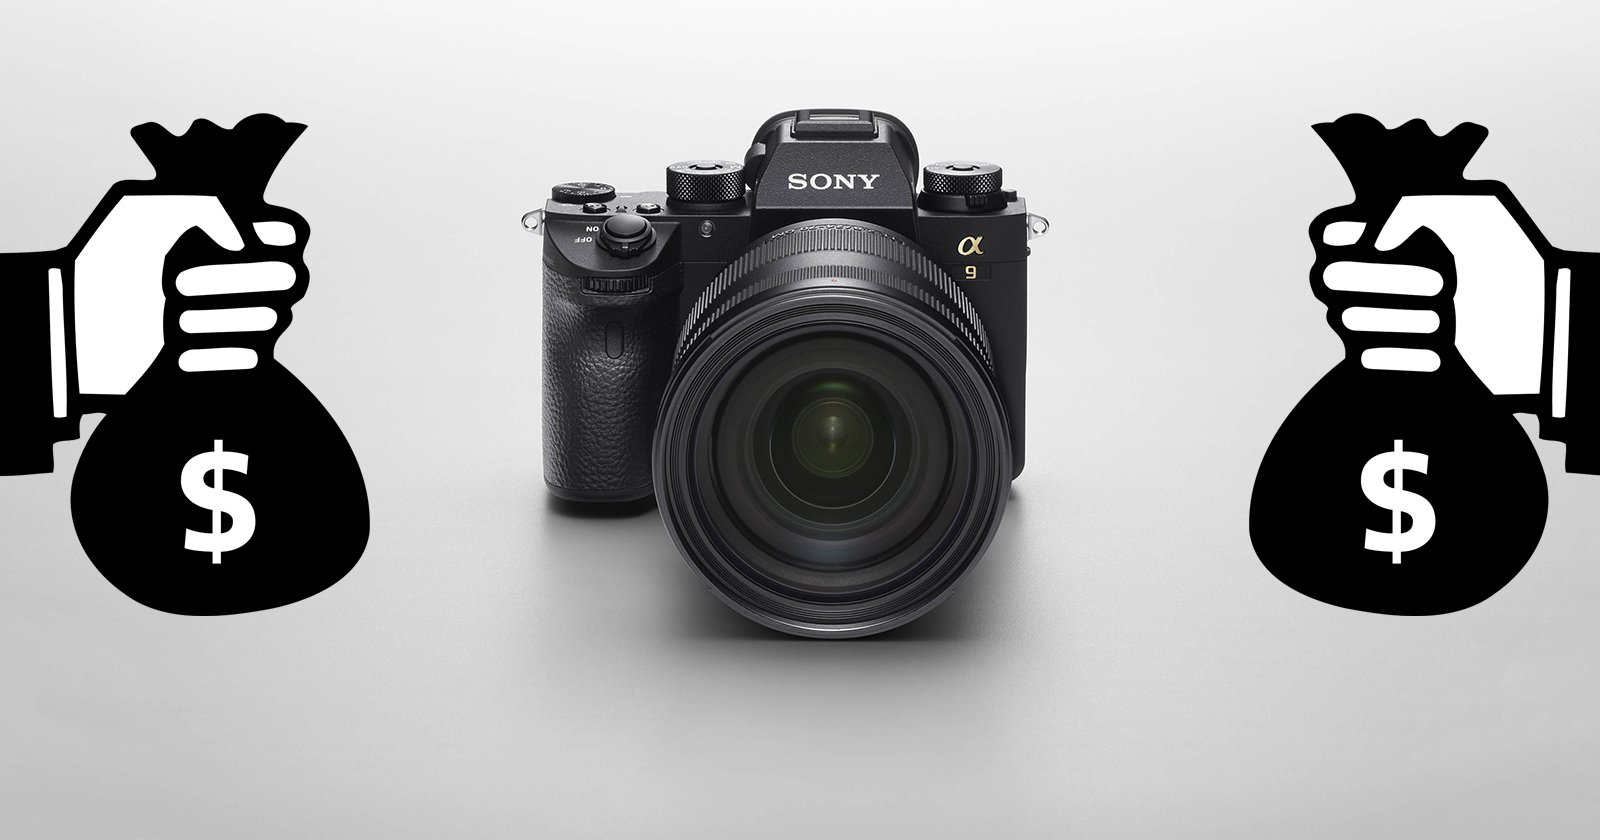 It Costs a Pro Photog Over $11,000 to Switch from Canon to Sony: Report